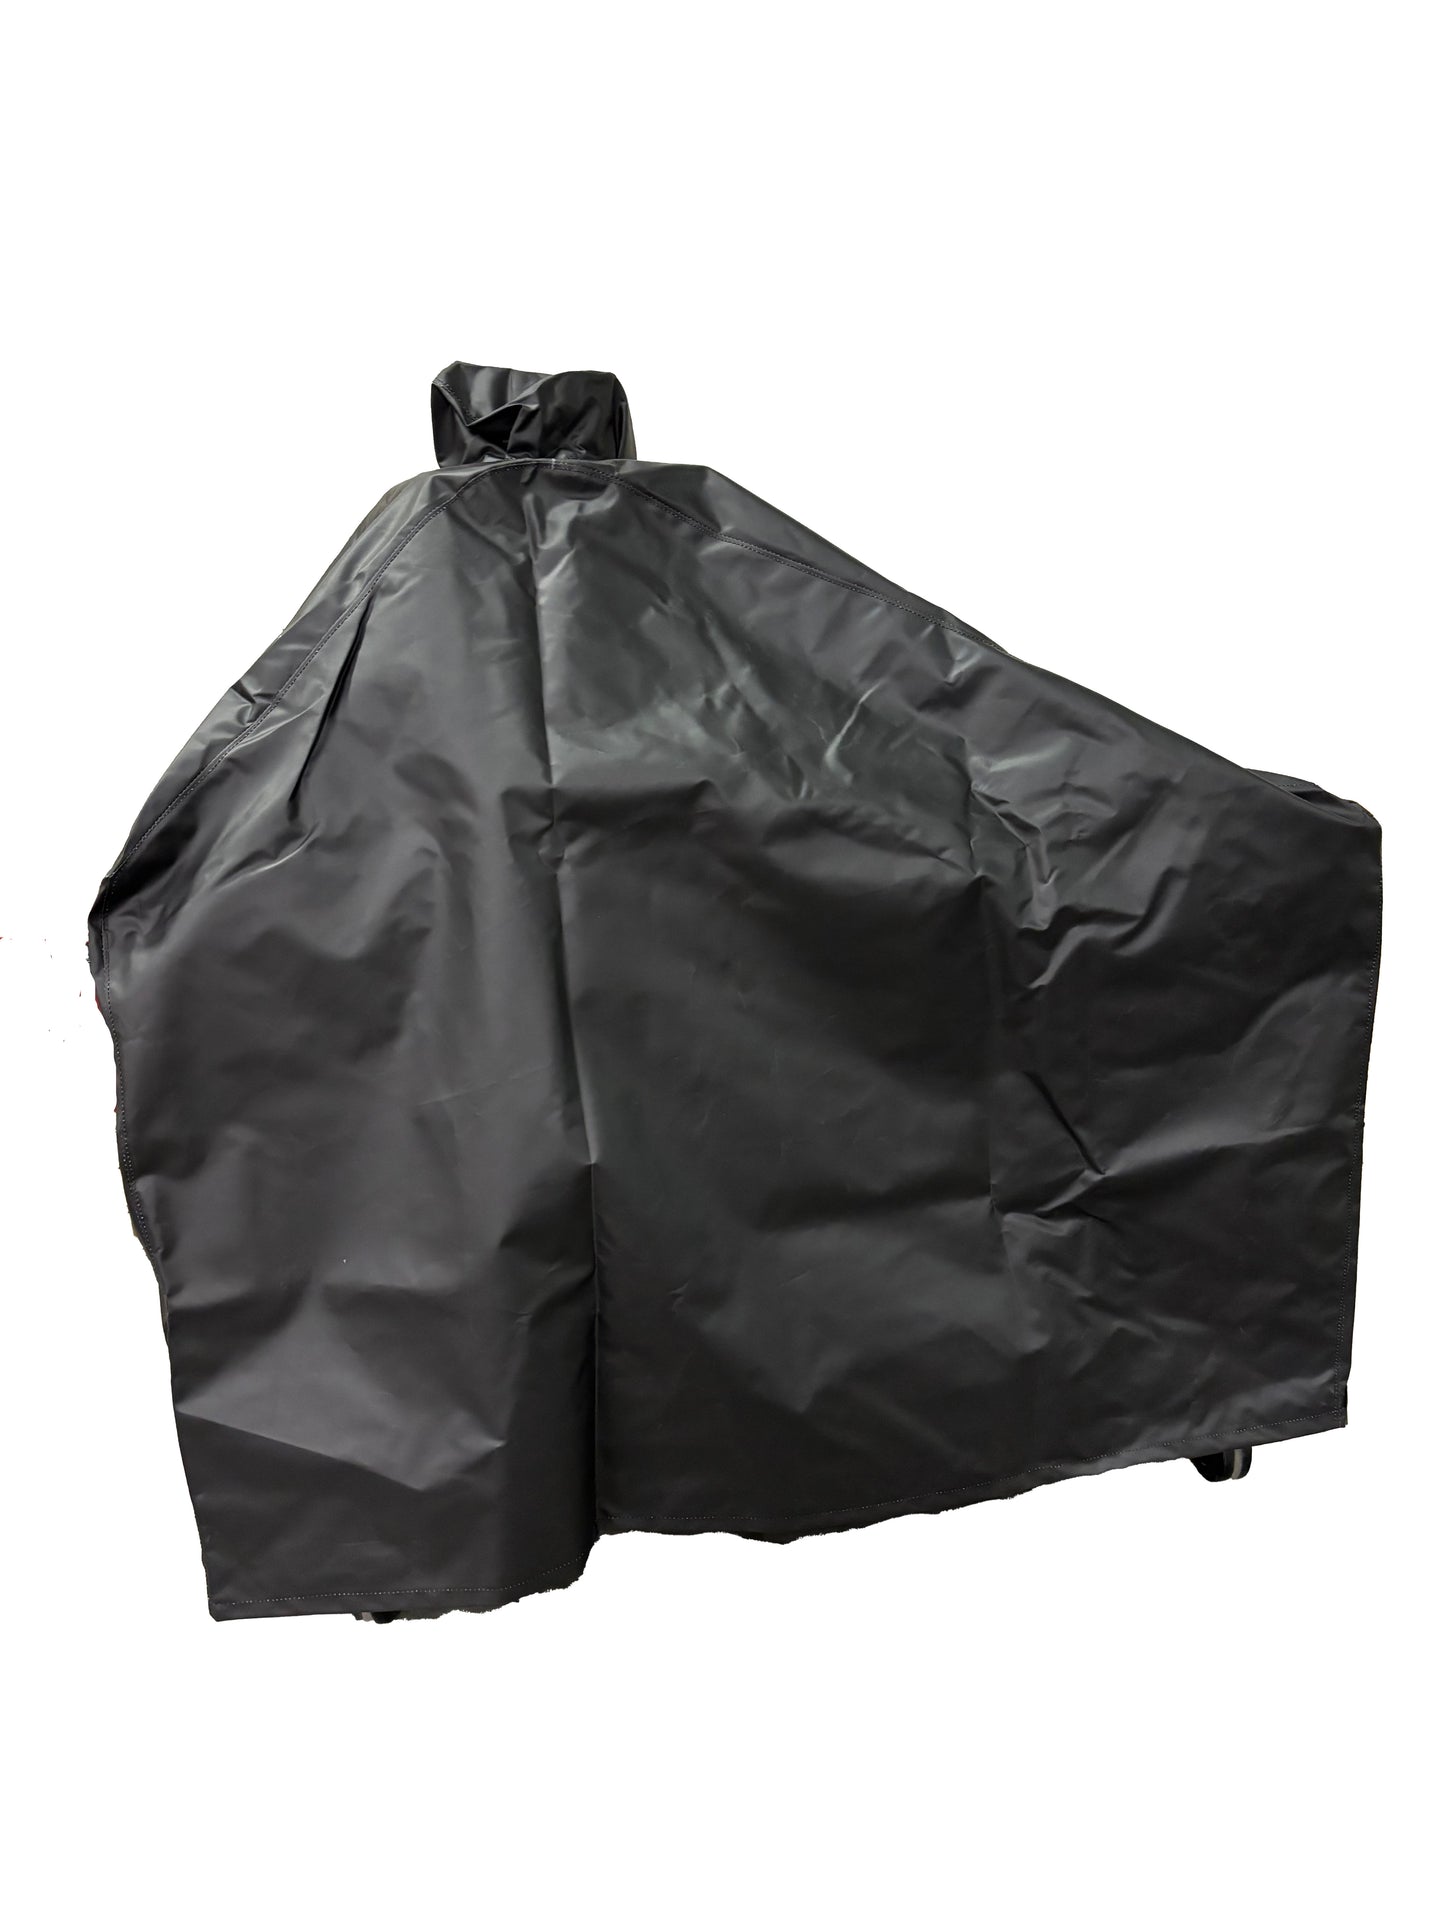 Sierra Grill Cart Cover